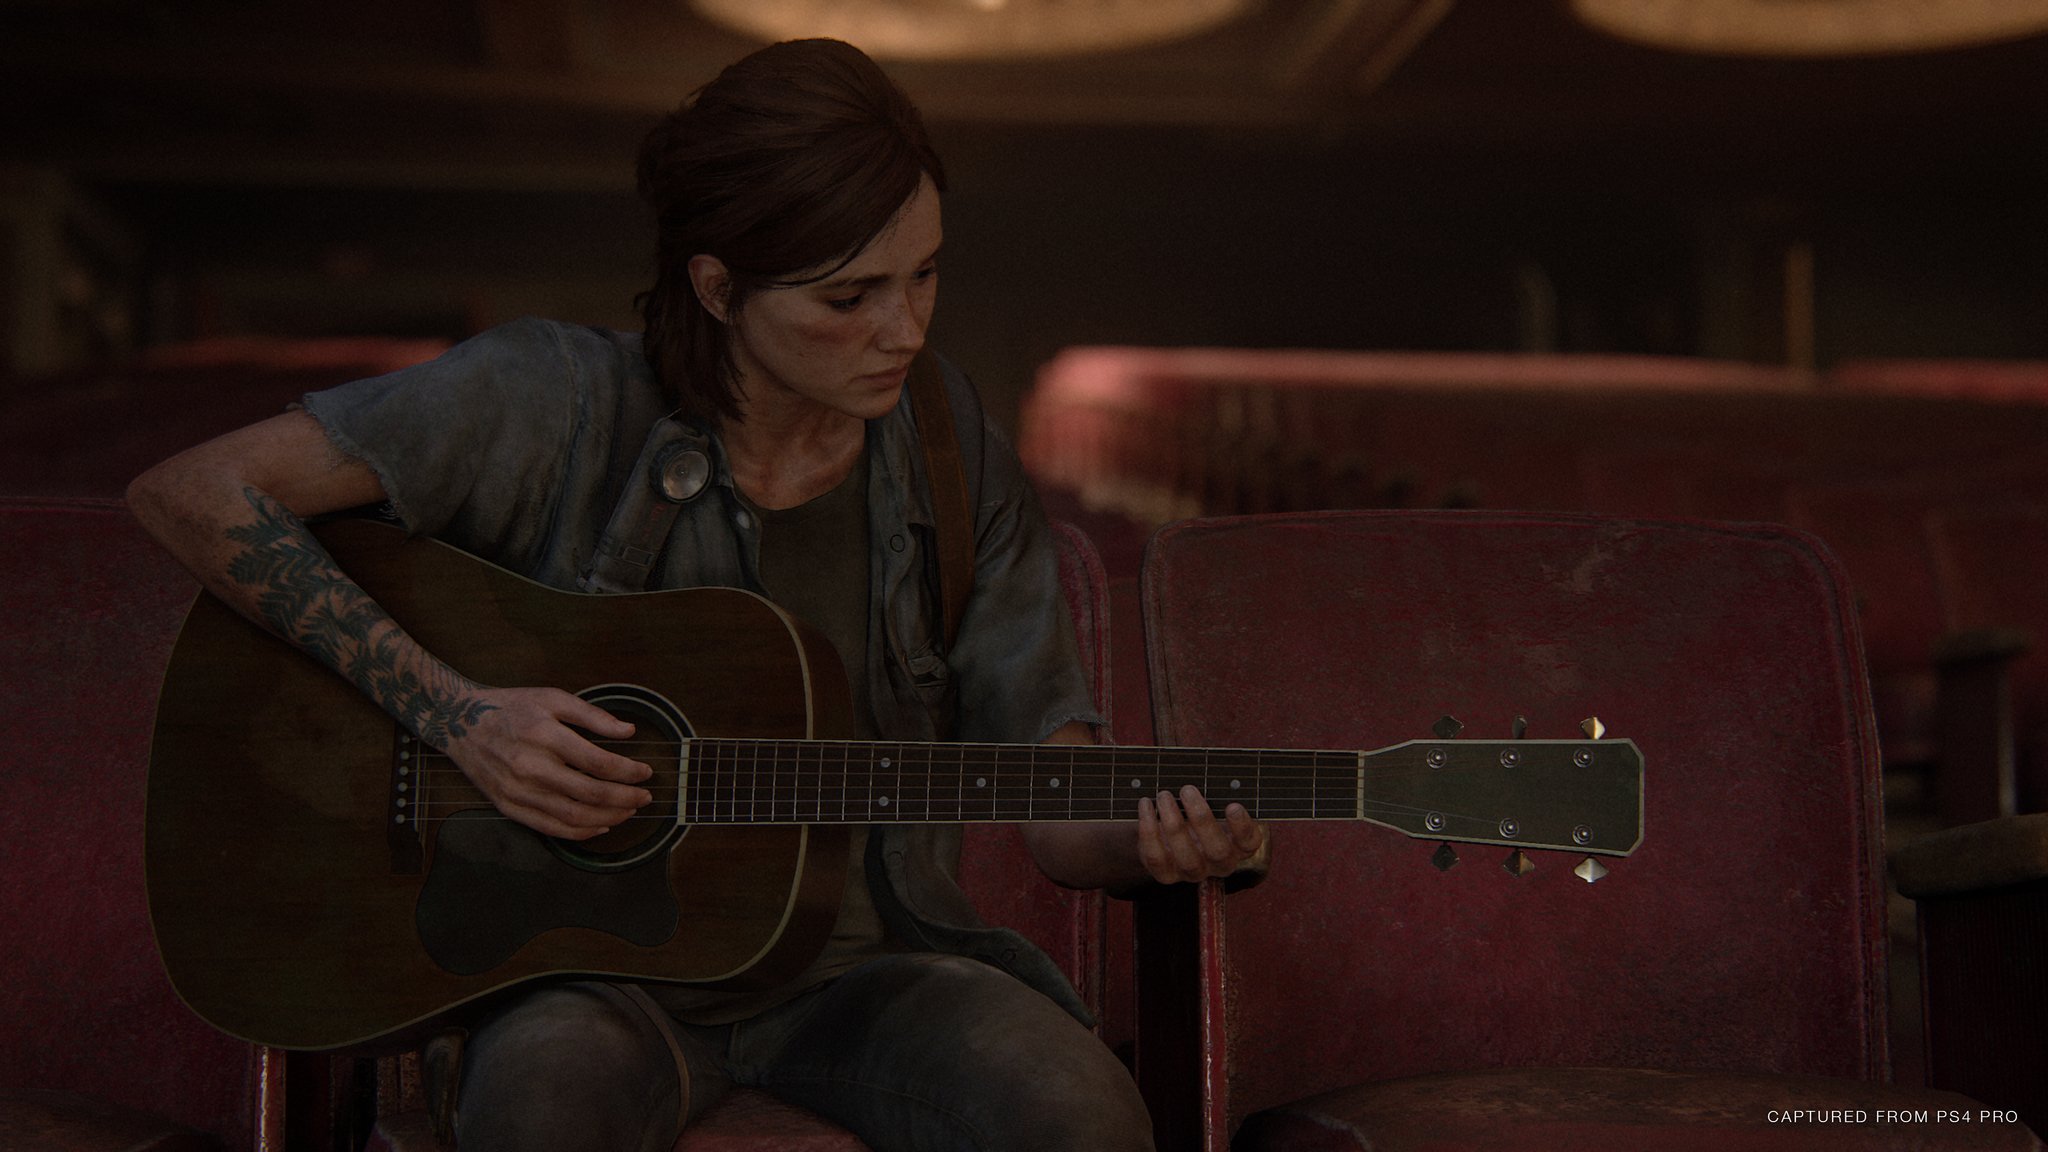 The Last of Us Part 2 review: video game study on the cycle of